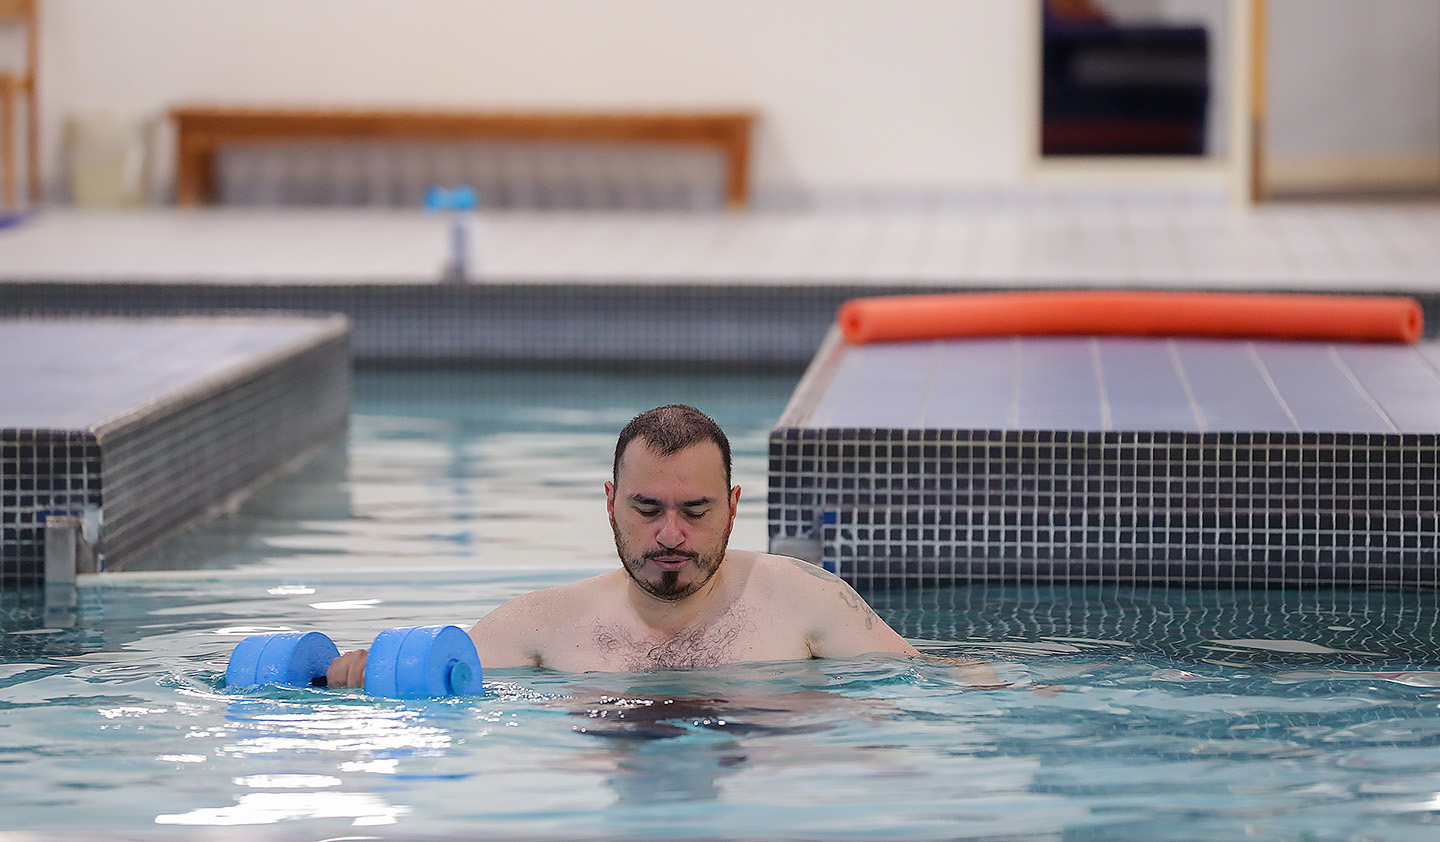 John Rodriguez continues to recover from a stroke he suffered four years ago. The 43-year-old Kearney resident works out in the pool at CHI Health Good Samaritan and receives additional support through the Creating Connections program launched earlier this year. (Photos by Erika Pritchard, UNK Communications)